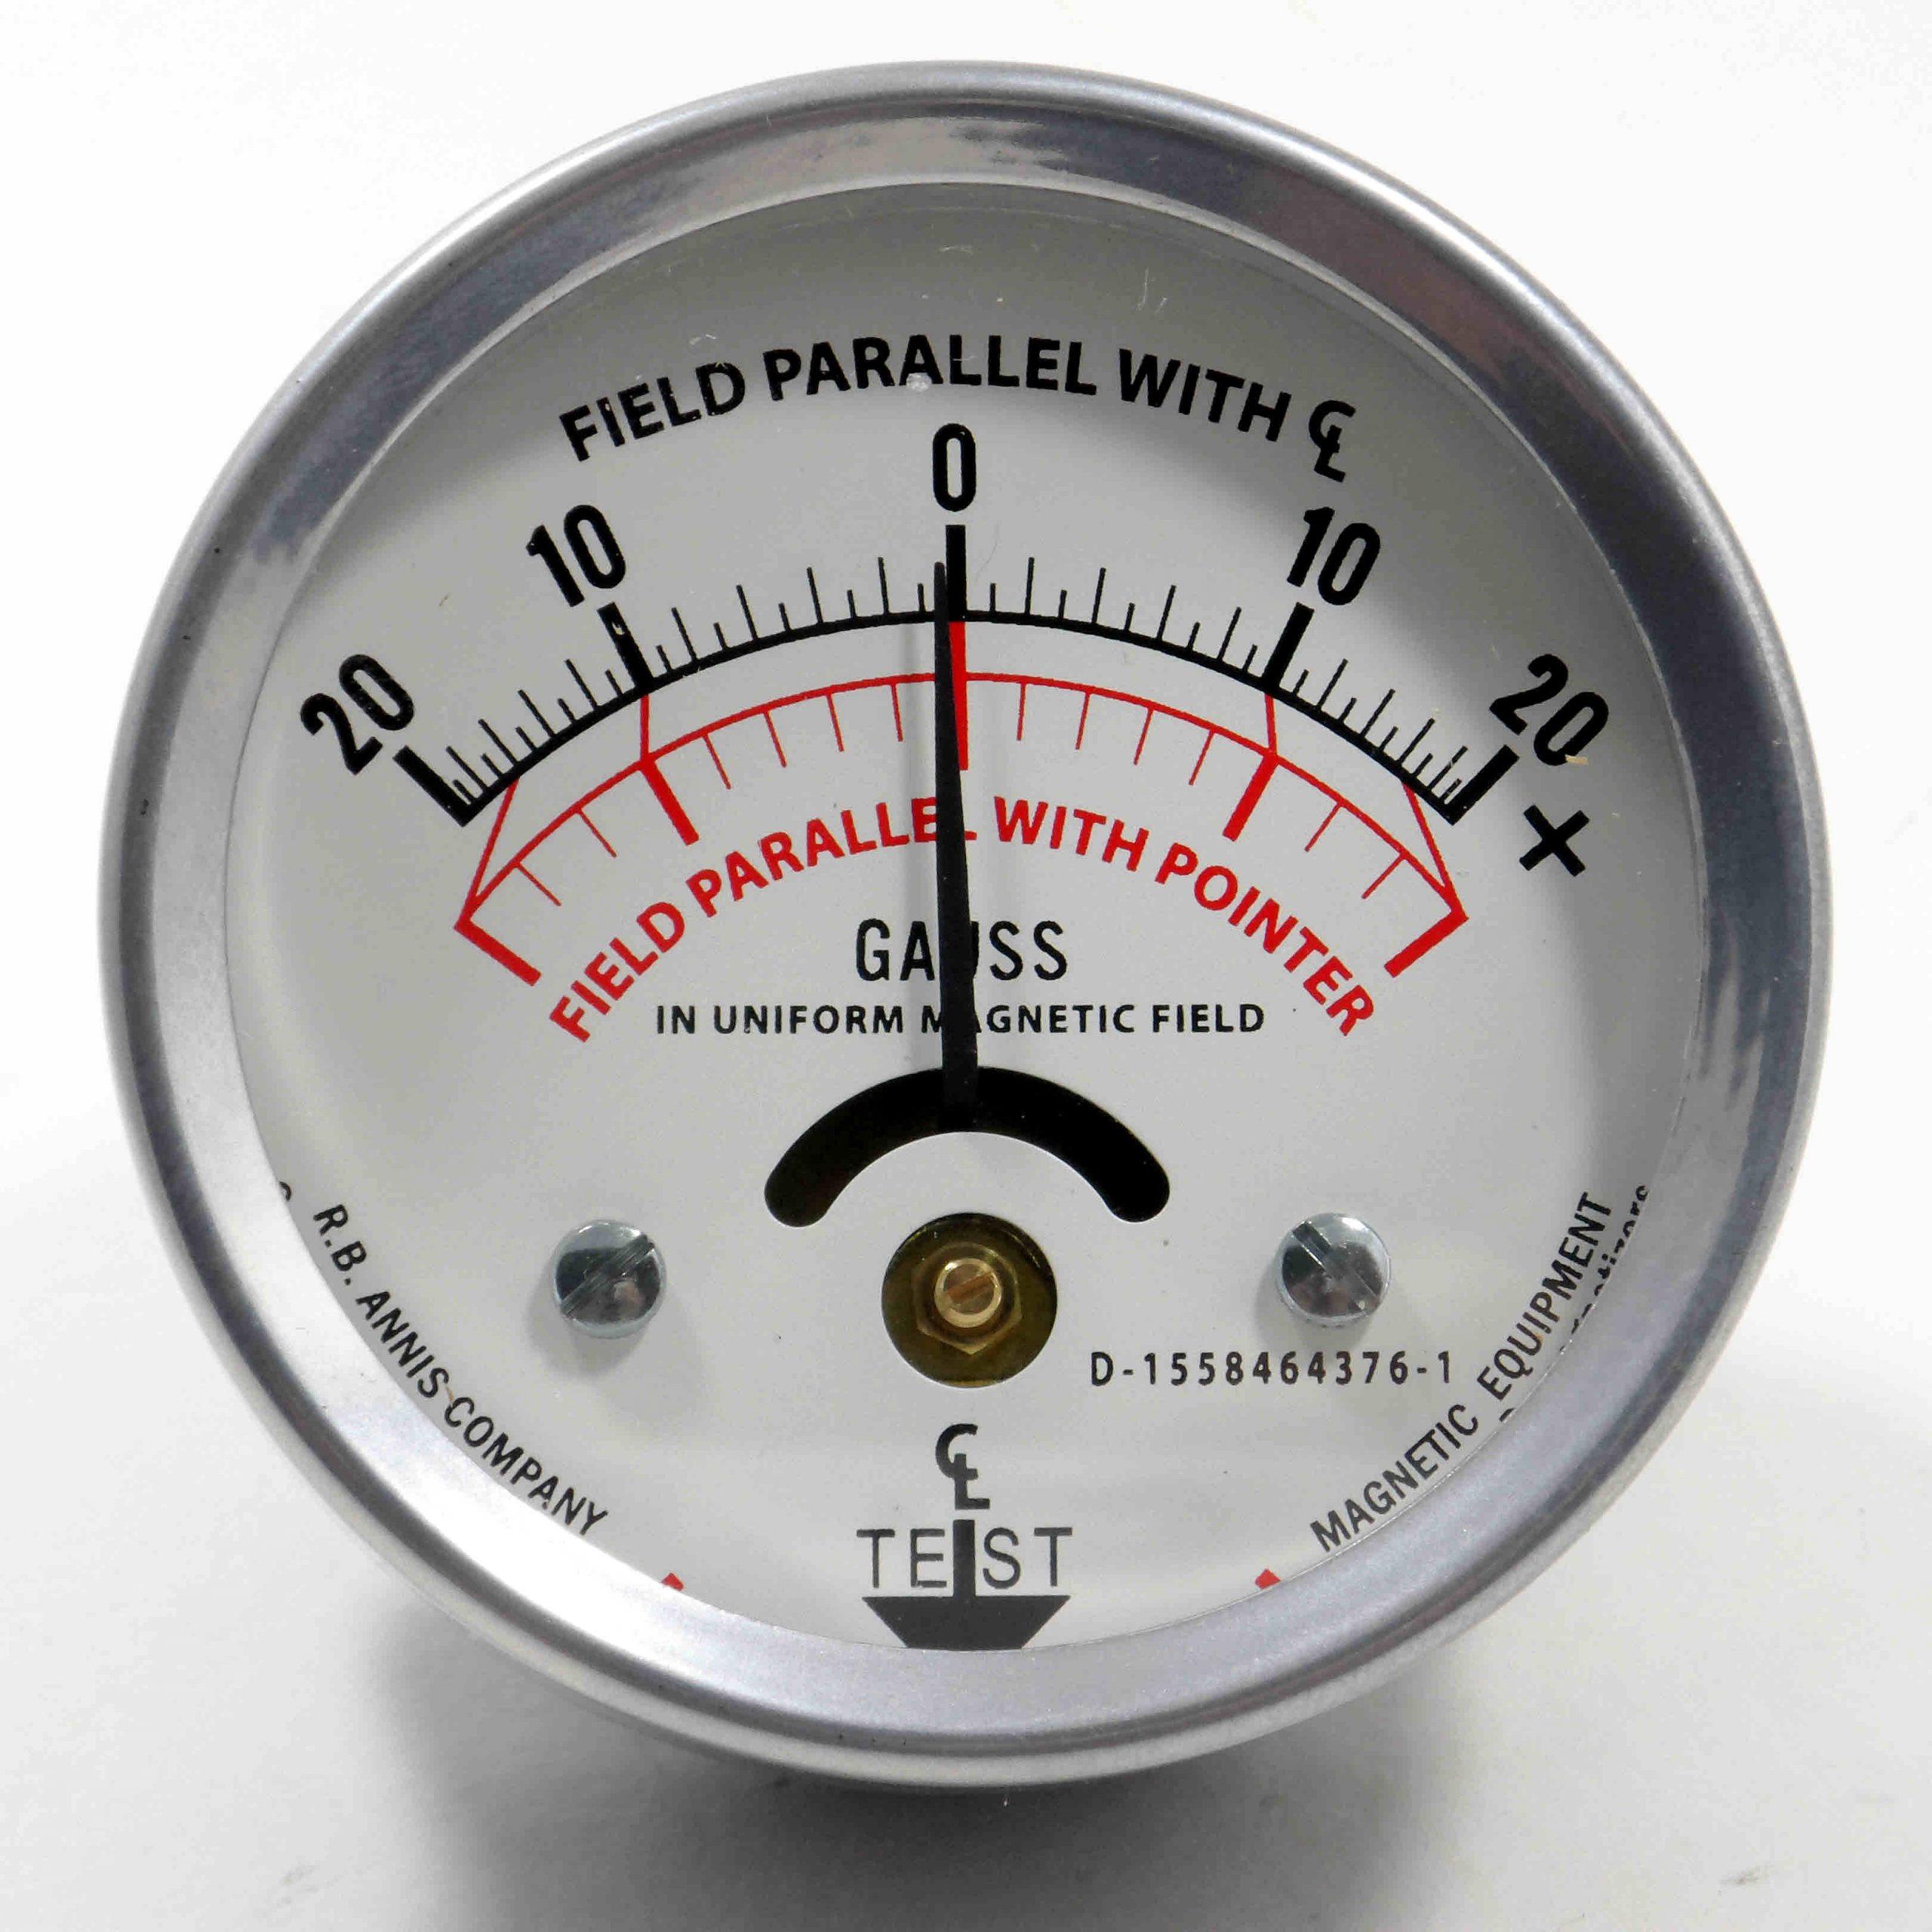 Magnetic Field Indicator